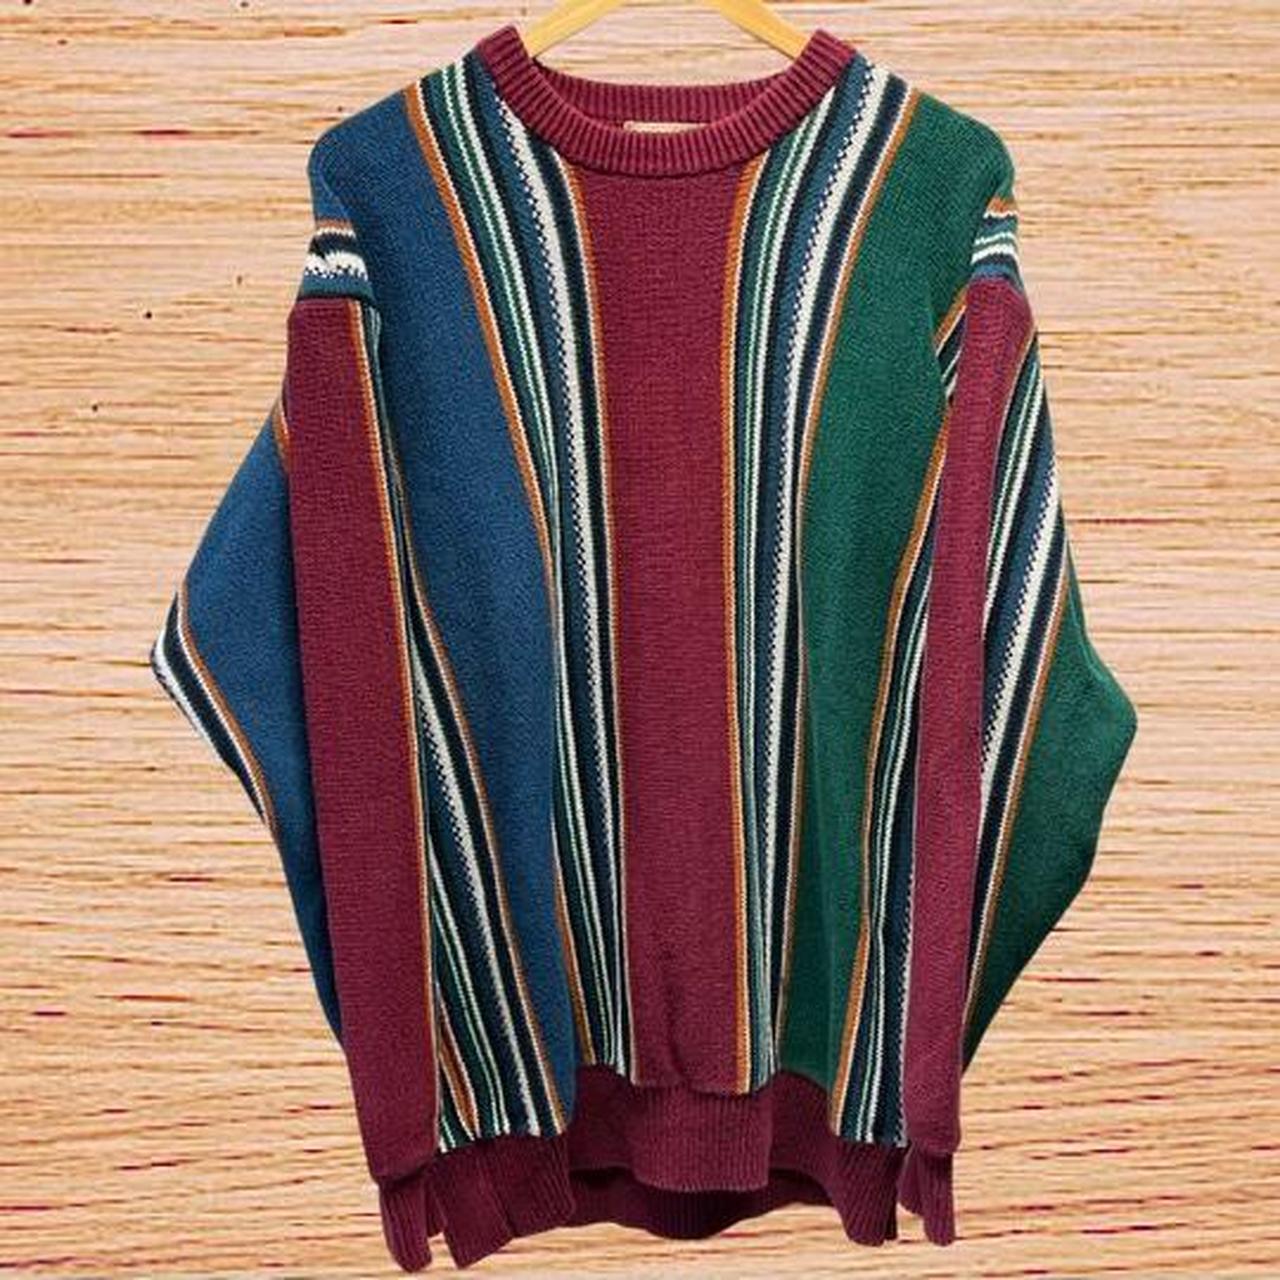 Product Image 1 - Cotton traders knit sweater!

Measurements:
Length- 30”
Width